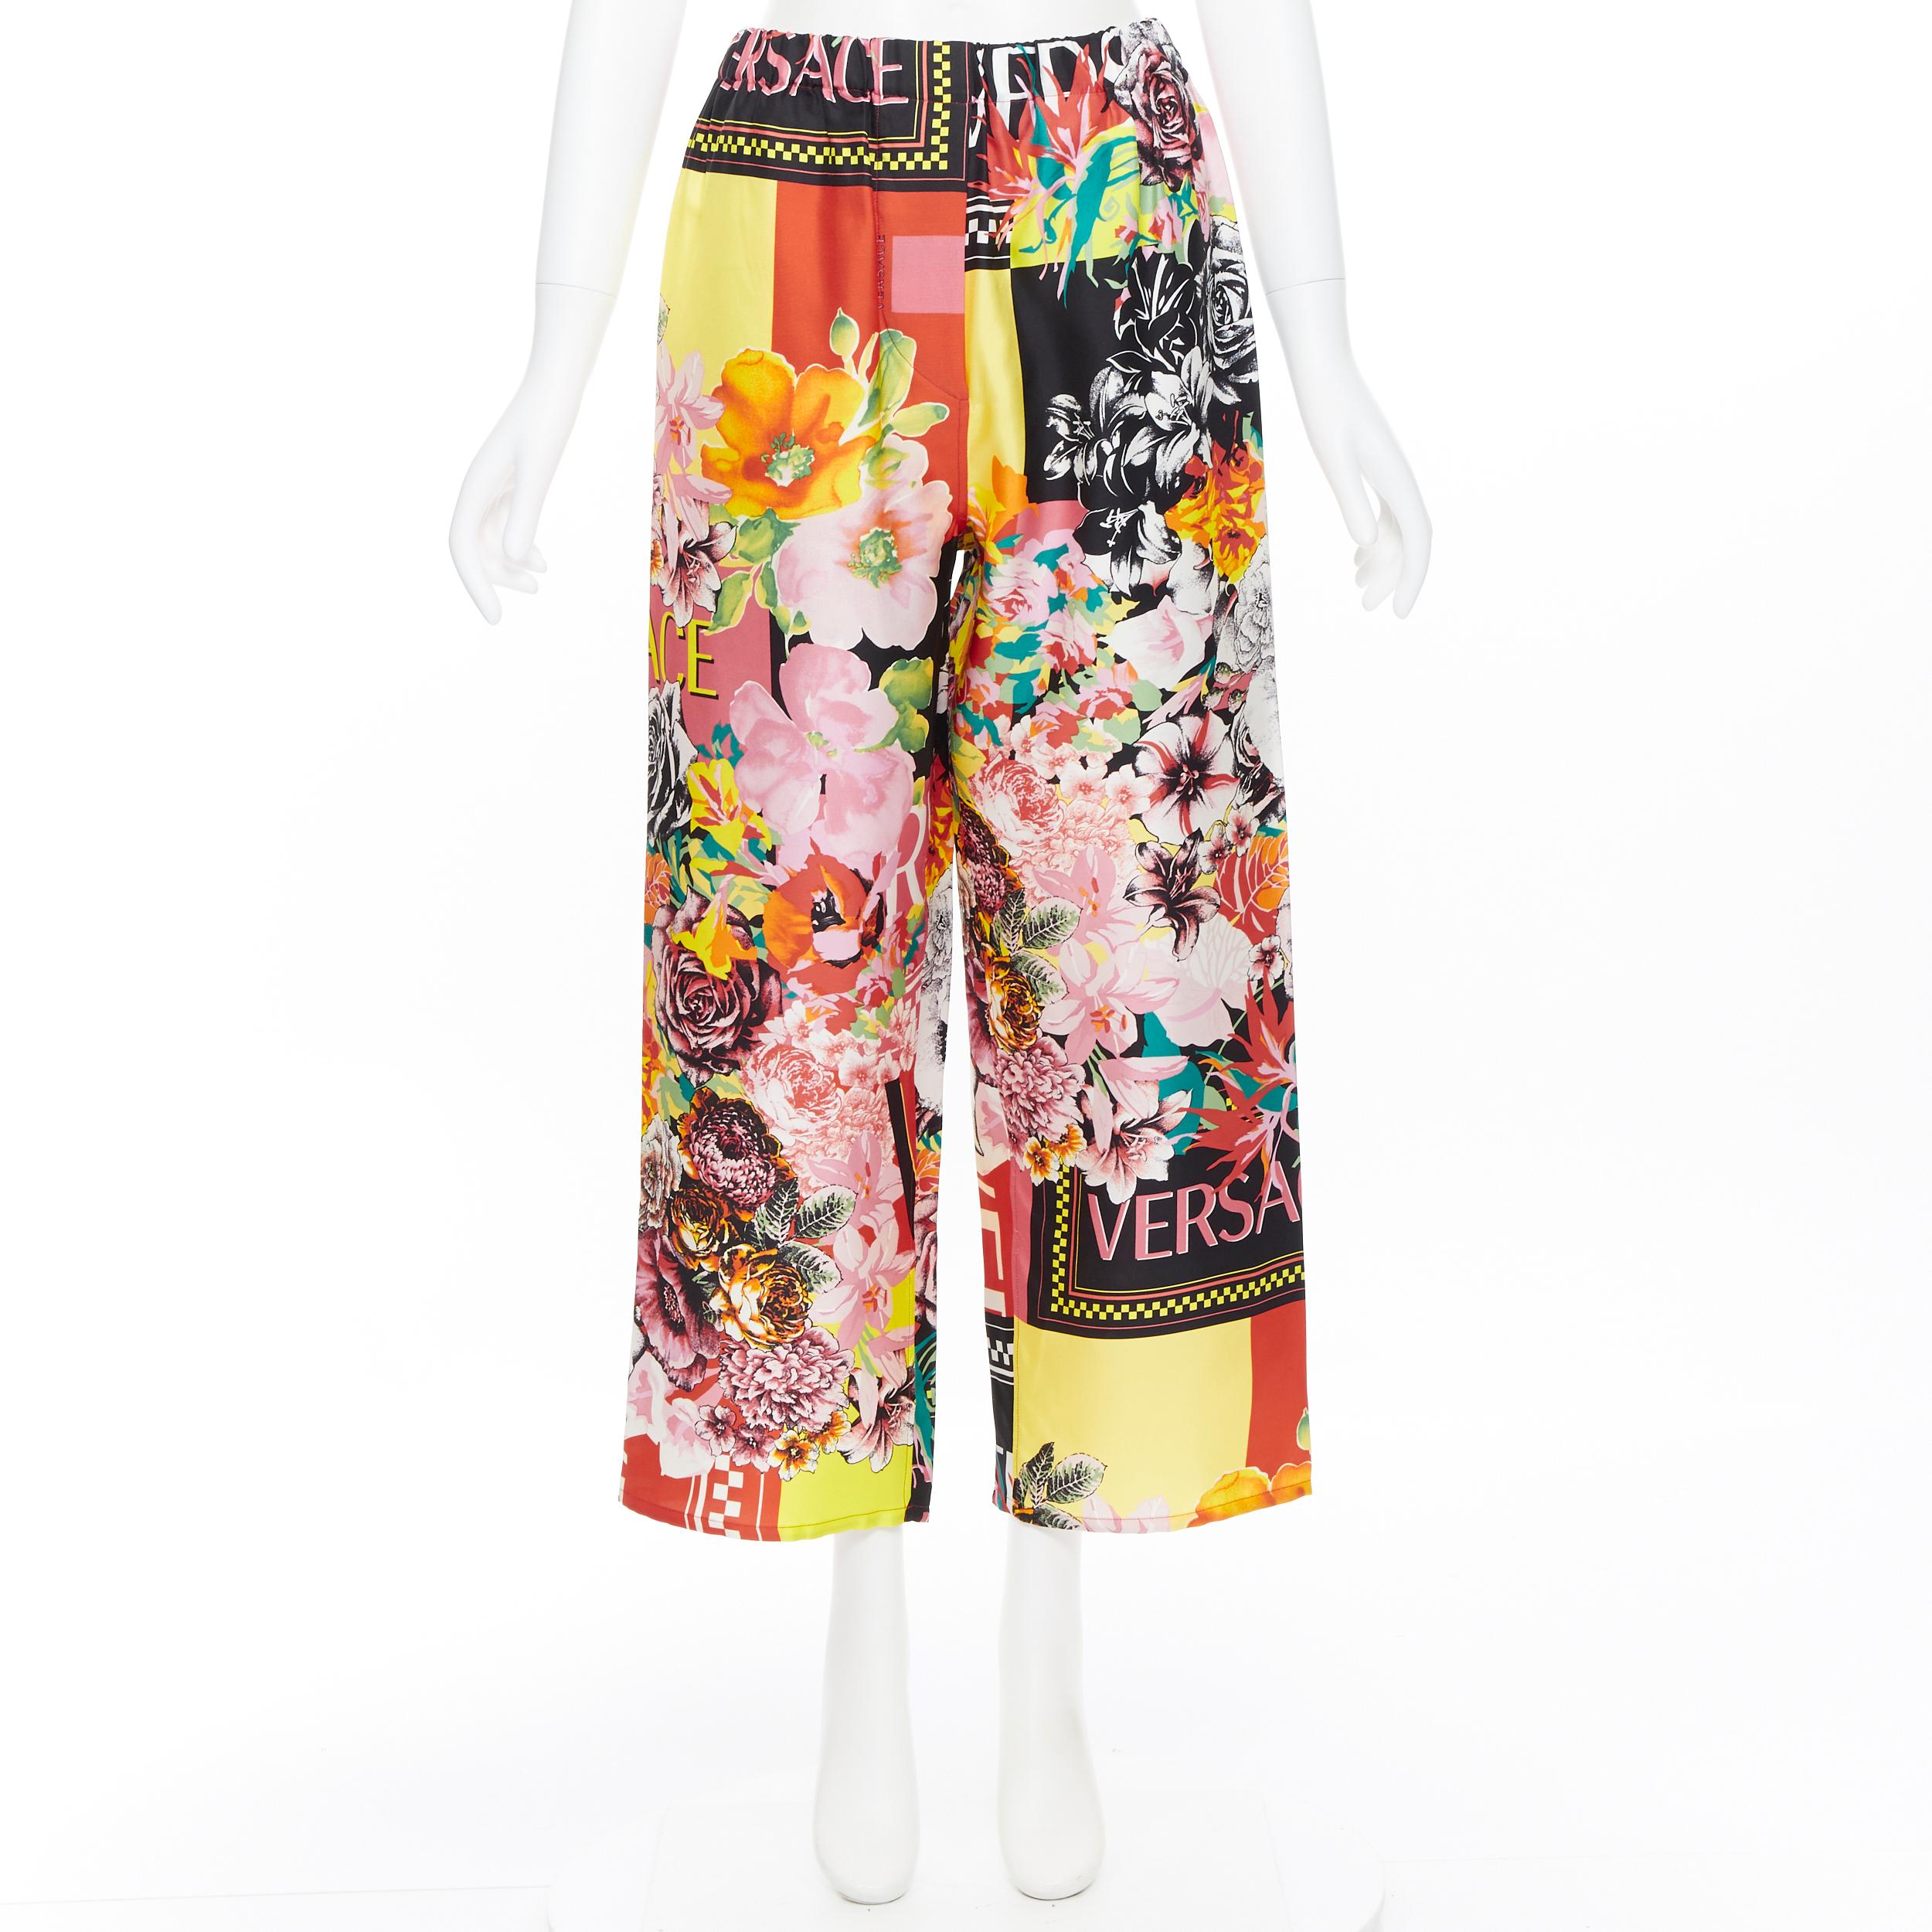 new VERSACE 100% silk SS19 floral flower box logo print casual pants IT38 XS
Brand: Versace
Designer: Donatella Versace
Collection: SS19 Runway Print
Model Name / Style: Silk pants
Material: Silk
Color: Multicolour
Pattern: Floral
Extra Detail: